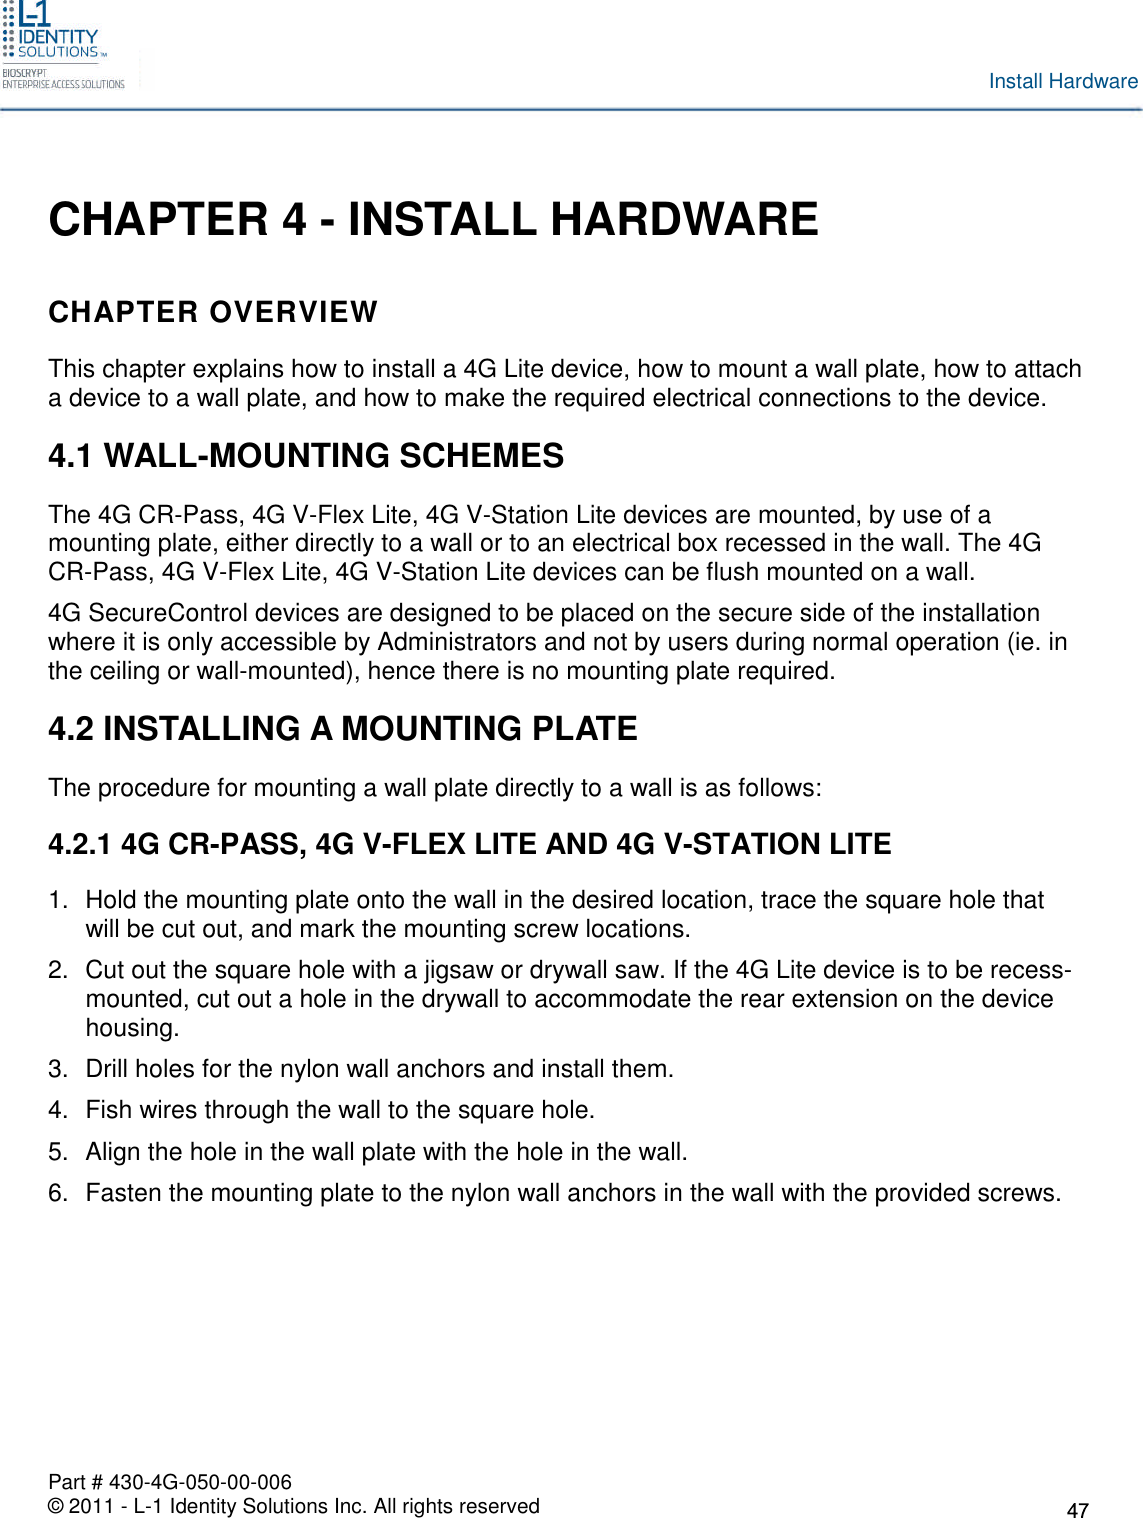 Part # 430-4G-050-00-006© 2011 - L-1 Identity Solutions Inc. All rights reservedInstall HardwareCHAPTER 4 - INSTALL HARDWARECHAPTER OVERVIEWThis chapter explains how to install a 4G Lite device, how to mount a wall plate, how to attacha device to a wall plate, and how to make the required electrical connections to the device.4.1 WALL-MOUNTING SCHEMESThe 4G CR-Pass, 4G V-Flex Lite, 4G V-Station Lite devices are mounted, by use of amounting plate, either directly to a wall or to an electrical box recessed in the wall. The 4GCR-Pass, 4G V-Flex Lite, 4G V-Station Lite devices can be flush mounted on a wall.4G SecureControl devices are designed to be placed on the secure side of the installationwhere it is only accessible by Administrators and not by users during normal operation (ie. inthe ceiling or wall-mounted), hence there is no mounting plate required.4.2 INSTALLING A MOUNTING PLATEThe procedure for mounting a wall plate directly to a wall is as follows:4.2.1 4G CR-PASS, 4G V-FLEX LITE AND 4G V-STATION LITE1. Hold the mounting plate onto the wall in the desired location, trace the square hole thatwill be cut out, and mark the mounting screw locations.2. Cut out the square hole with a jigsaw or drywall saw. If the 4G Lite device is to be recess-mounted, cut out a hole in the drywall to accommodate the rear extension on the devicehousing.3. Drill holes for the nylon wall anchors and install them.4. Fish wires through the wall to the square hole.5. Align the hole in the wall plate with the hole in the wall.6. Fasten the mounting plate to the nylon wall anchors in the wall with the provided screws.